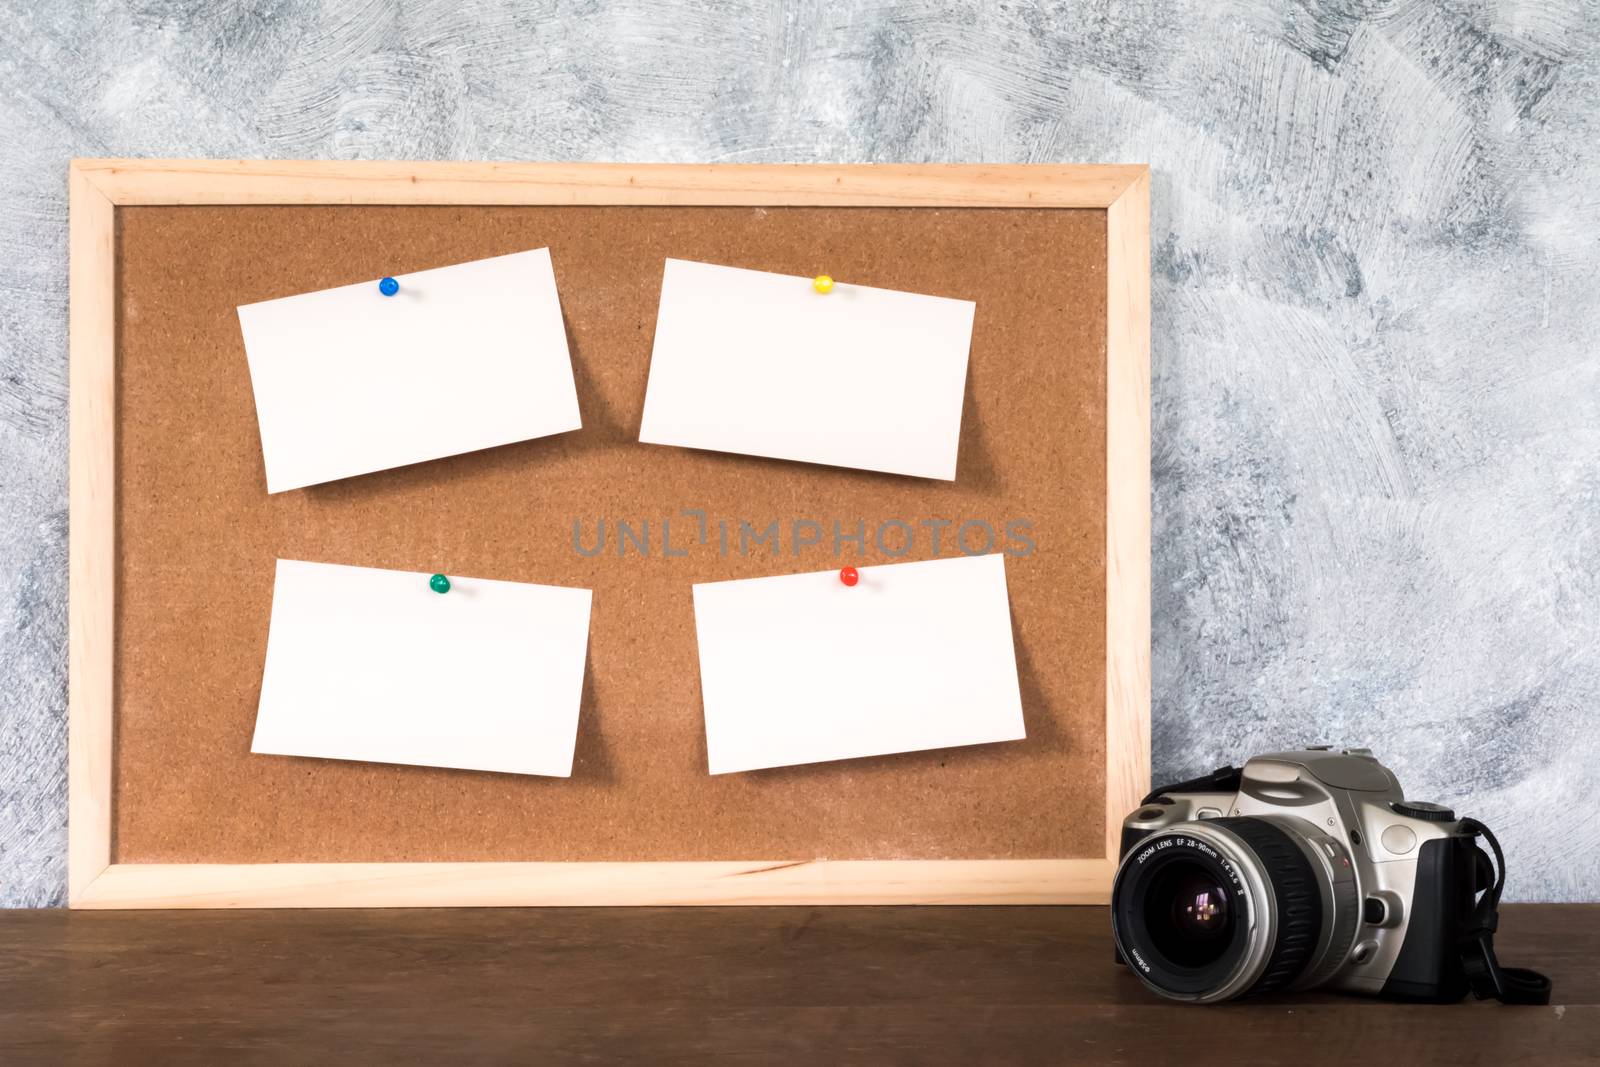 Blank papers pin up on cork board and camera over wooden table with textured background.